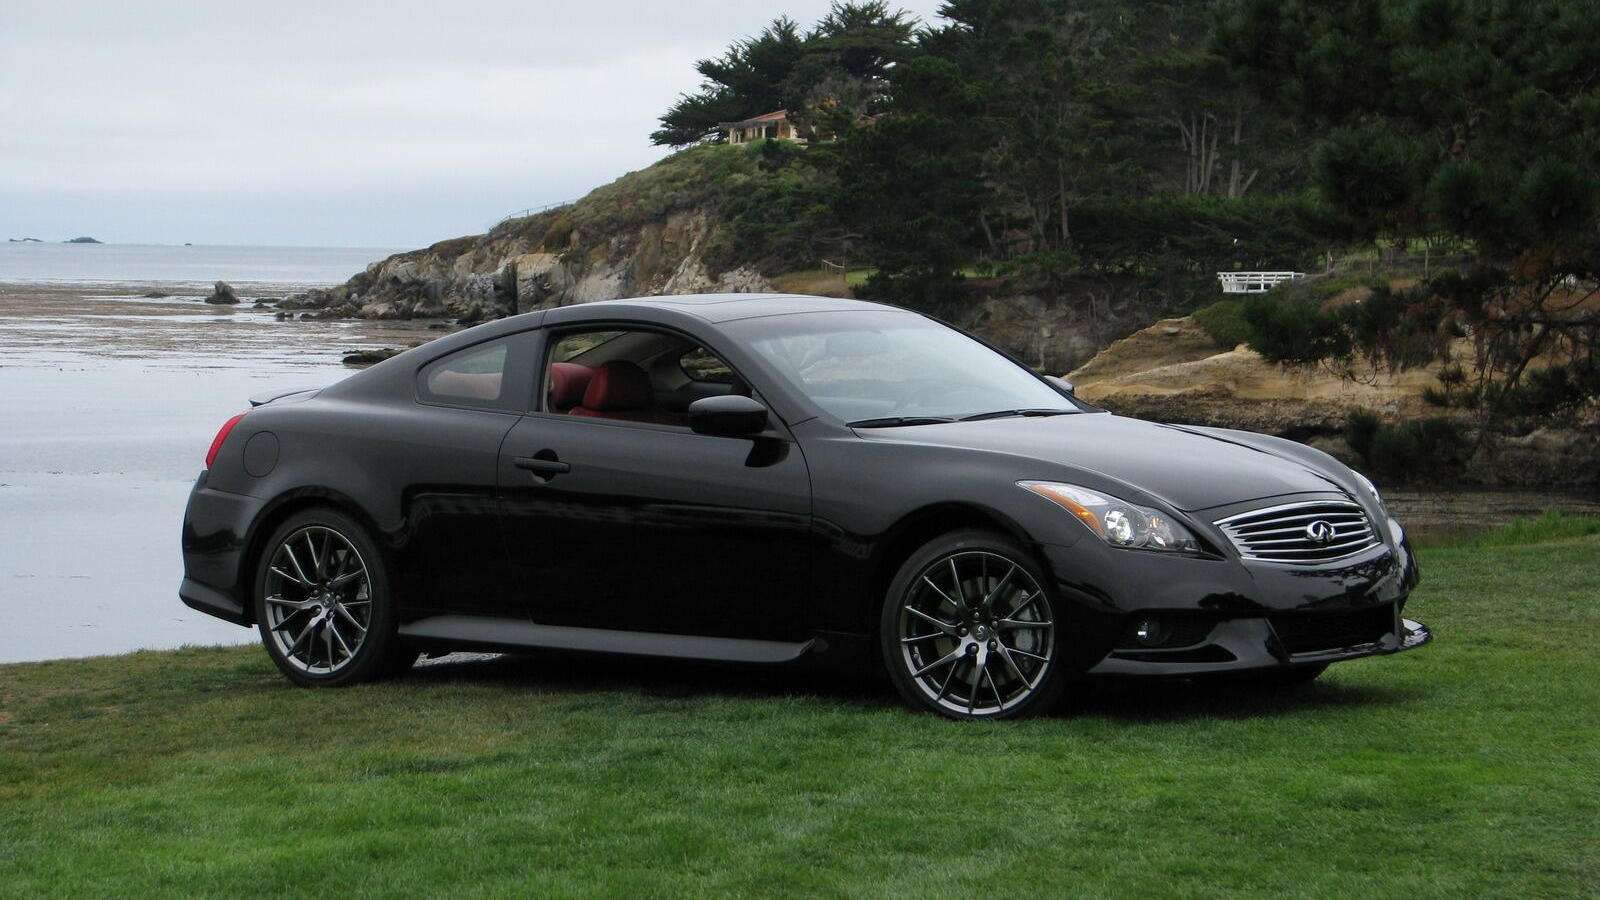 2011 Infiniti G37 Coupe IPL live from Pebble Beach